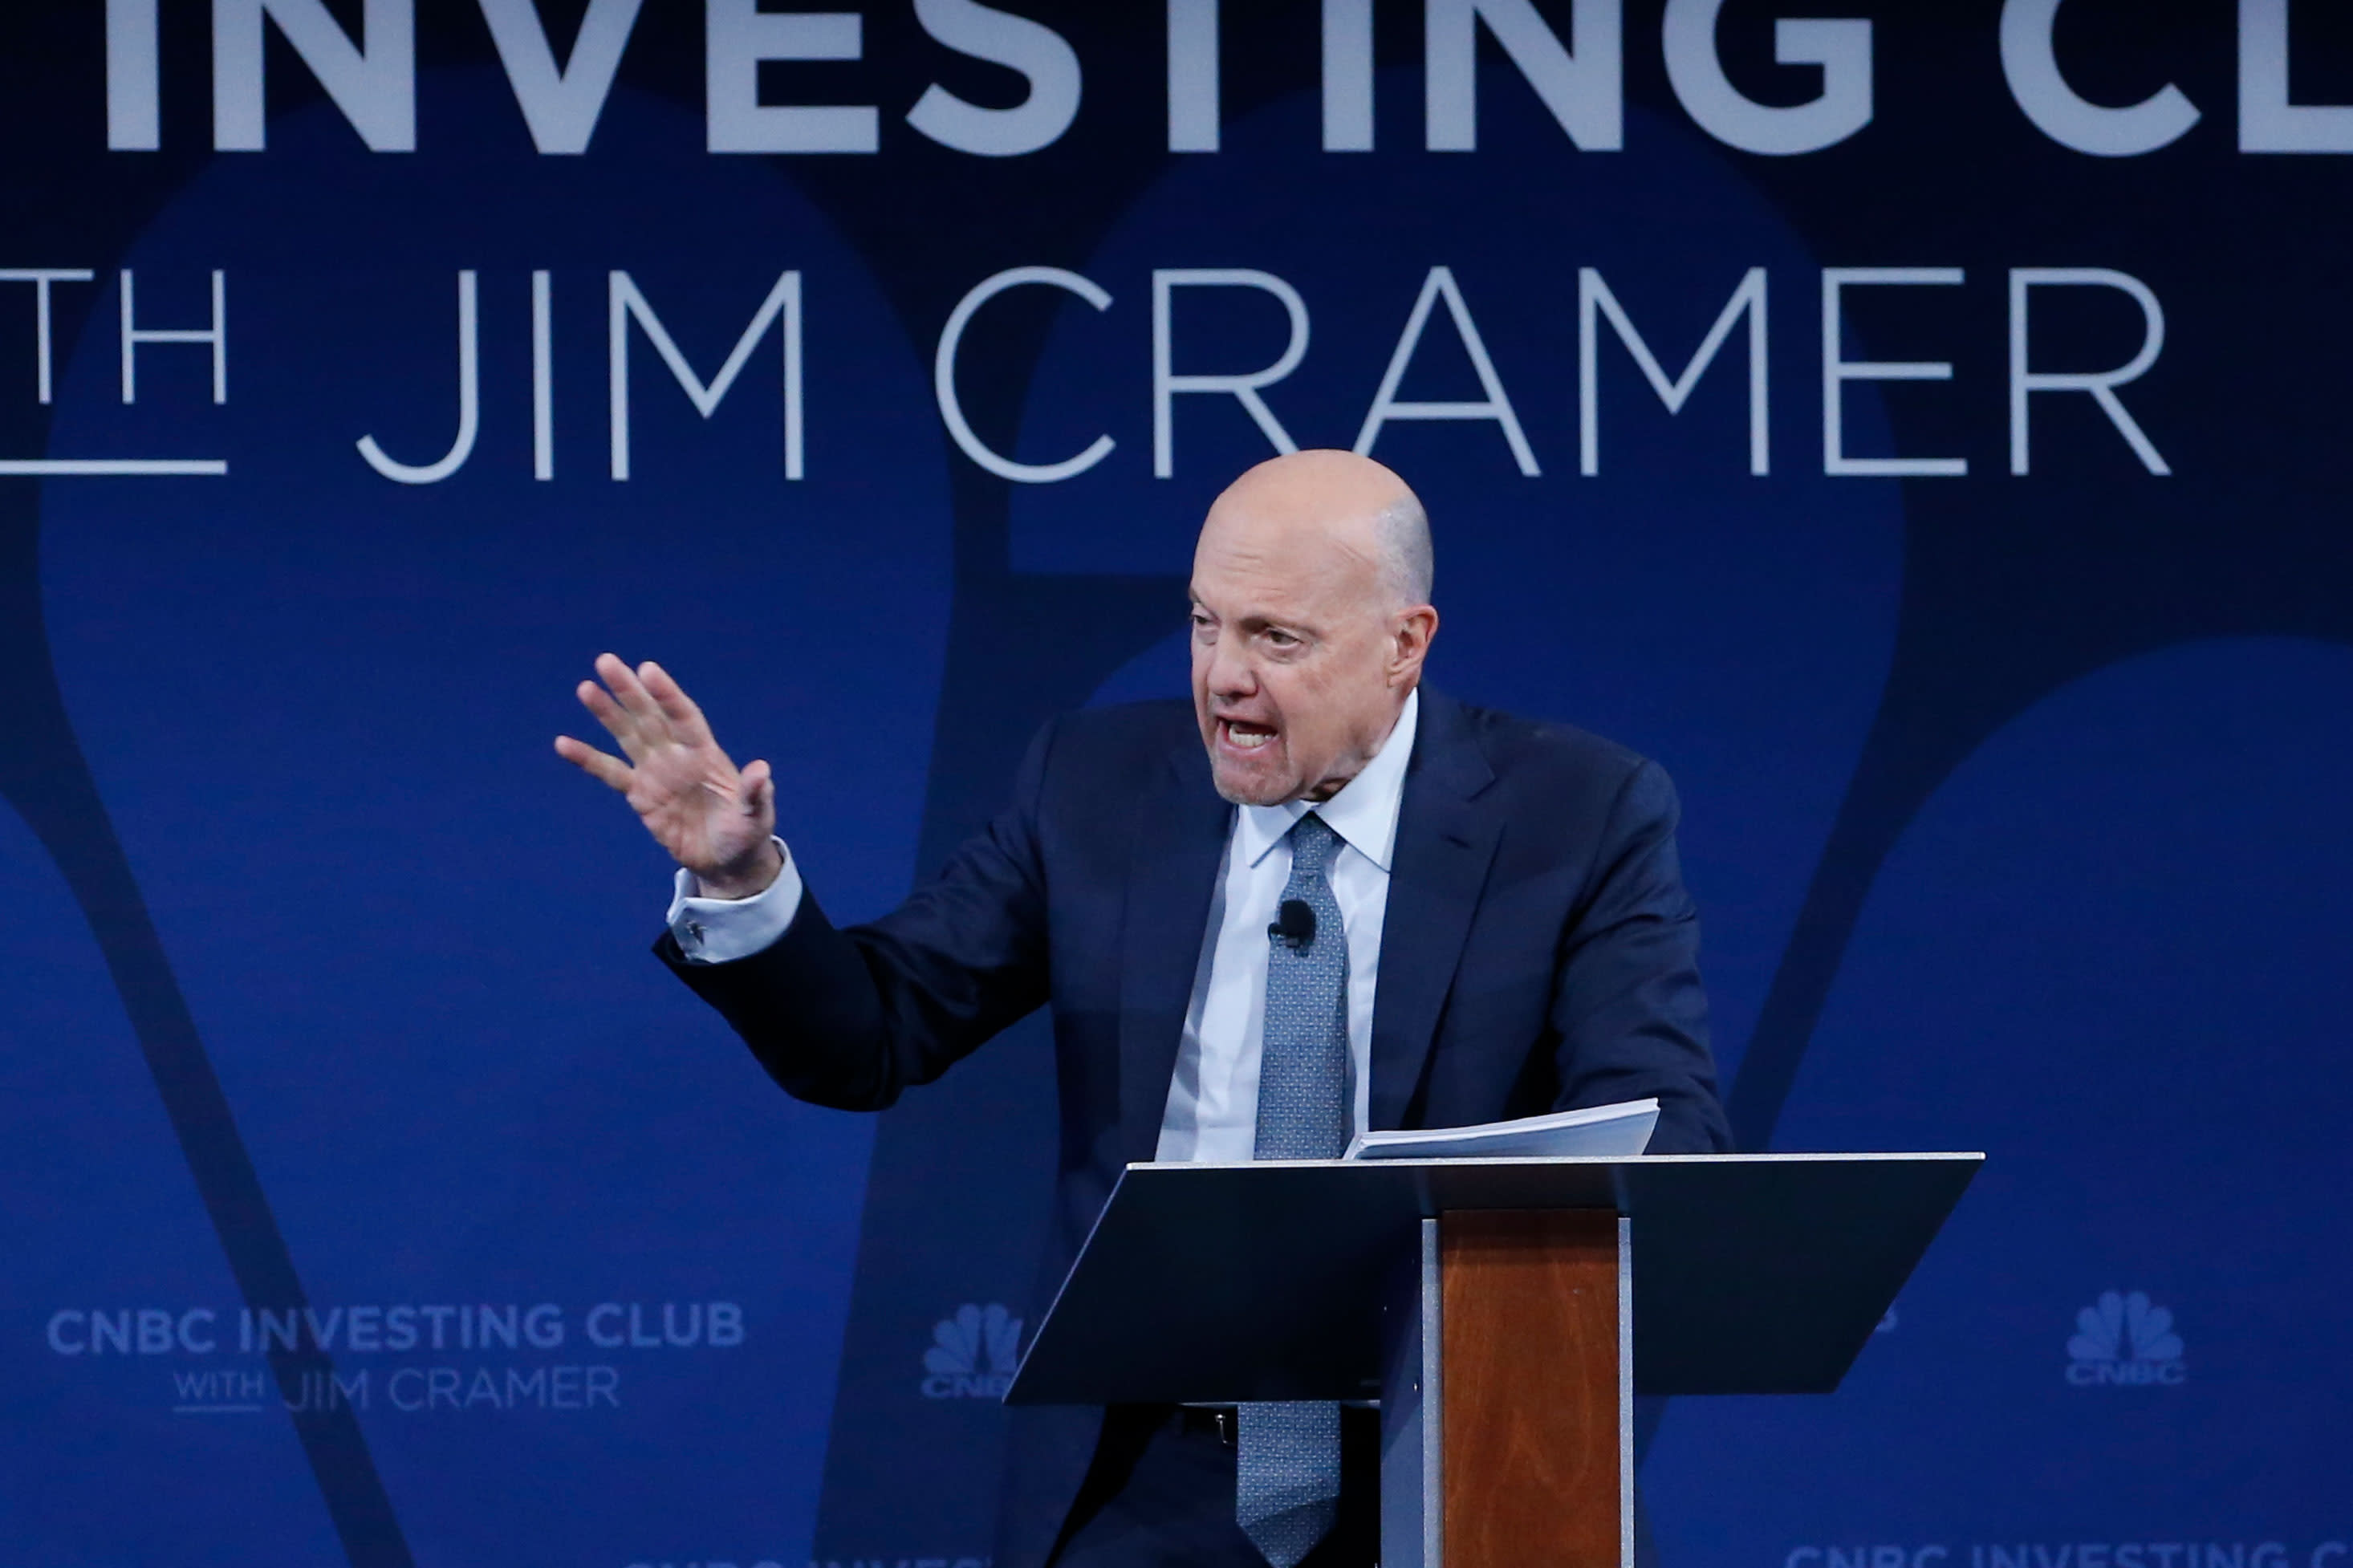 Here's our March rapid-fire update on all 36 stocks in Jim Cramer's Investing Club portfolio